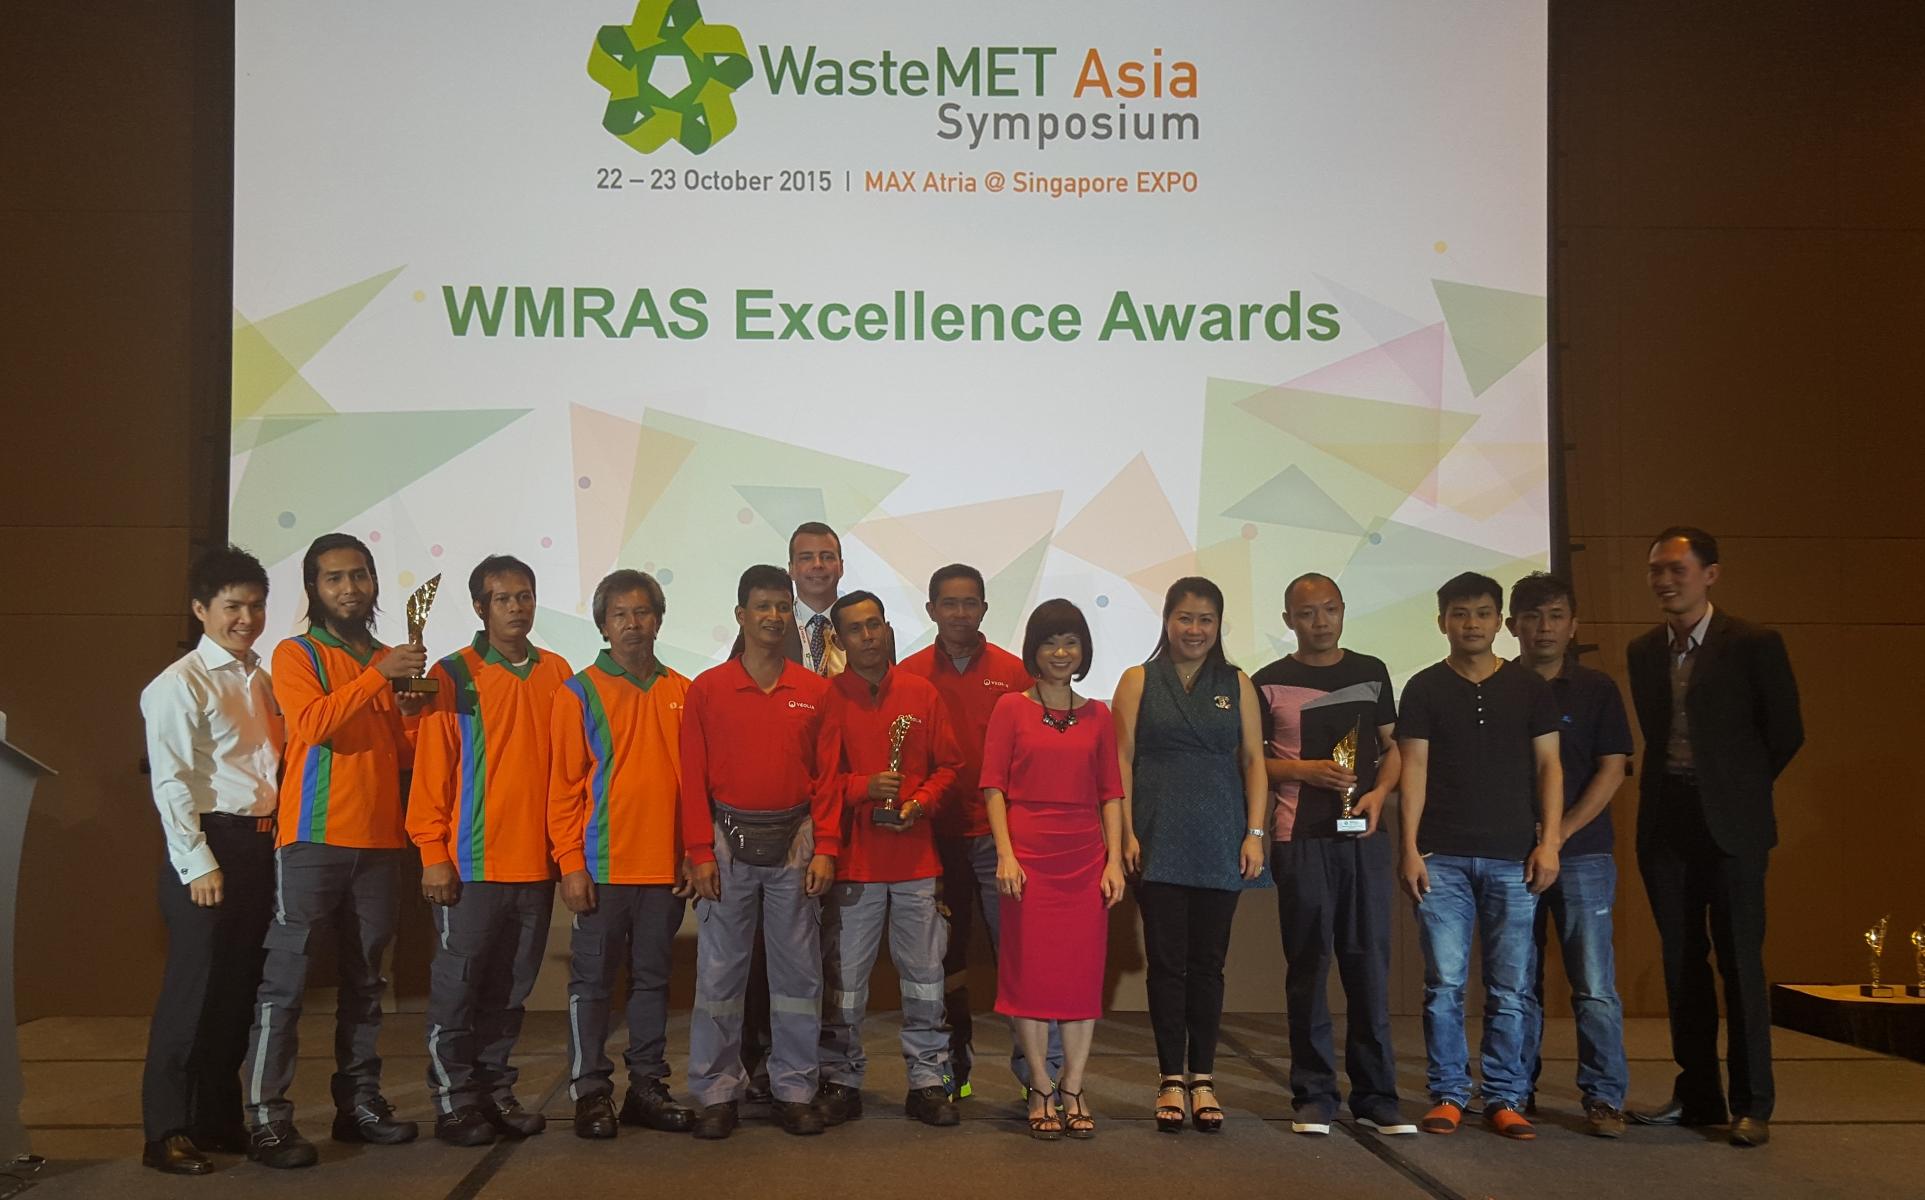 WasteMET Symposium Asia, Waste and Recycling Industry, Veolia, Industry Leader